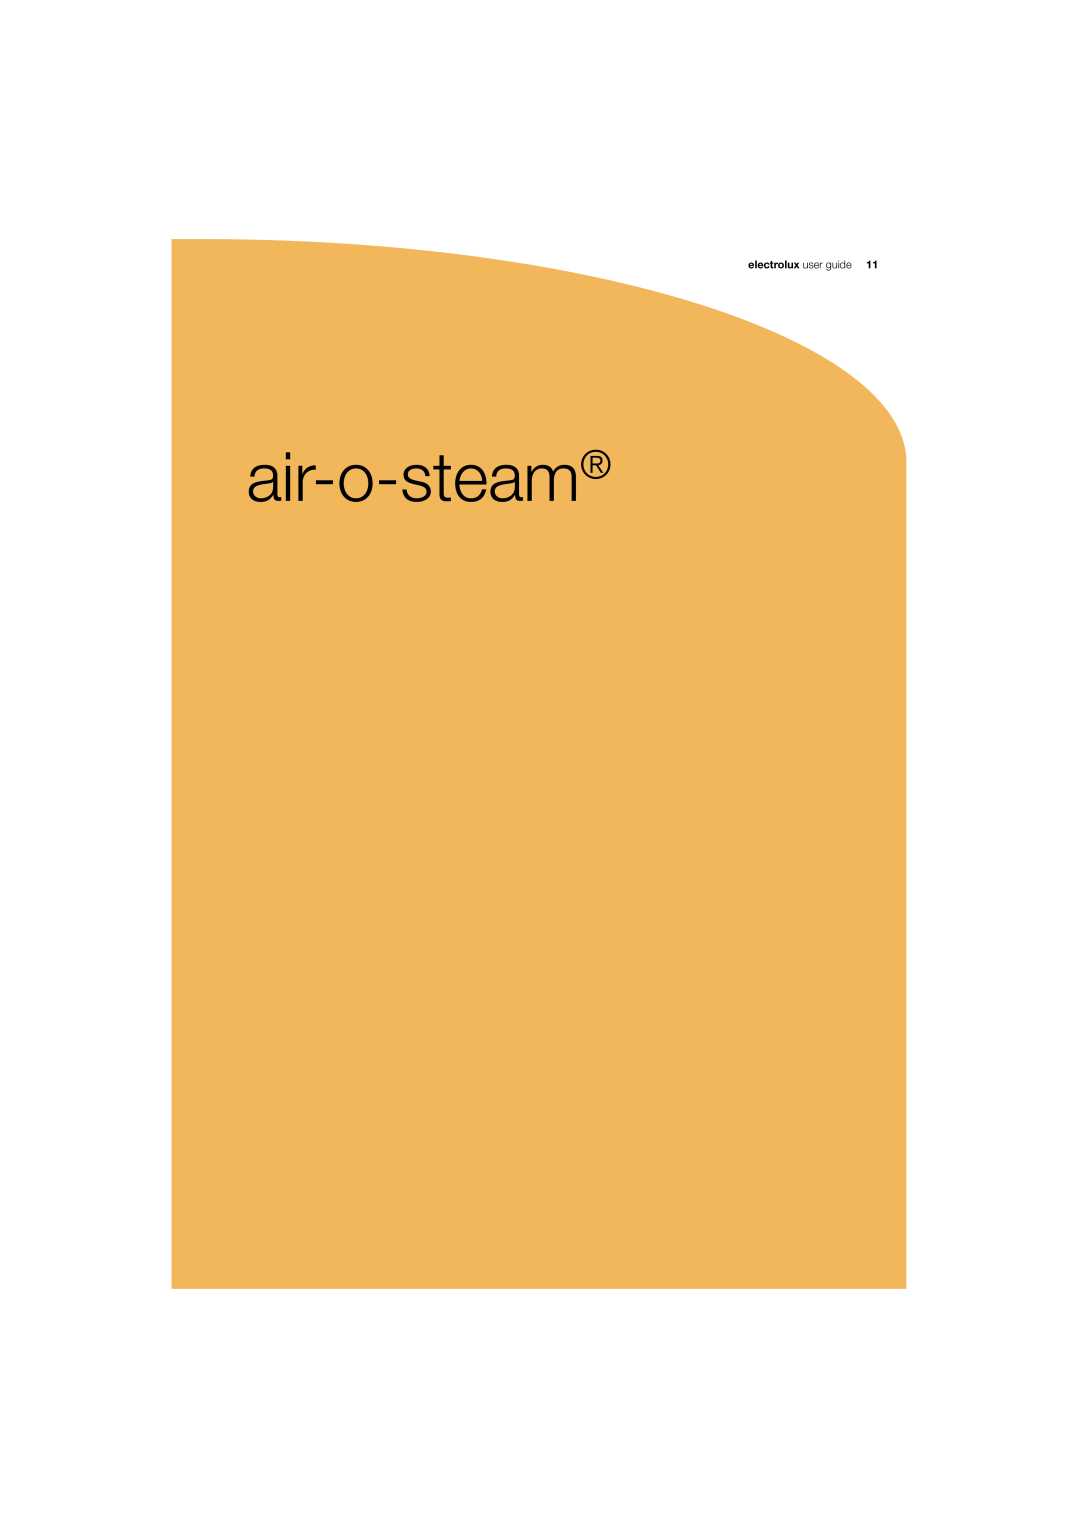 Electrolux 180 manual air-o-steam, electrolux user guide 